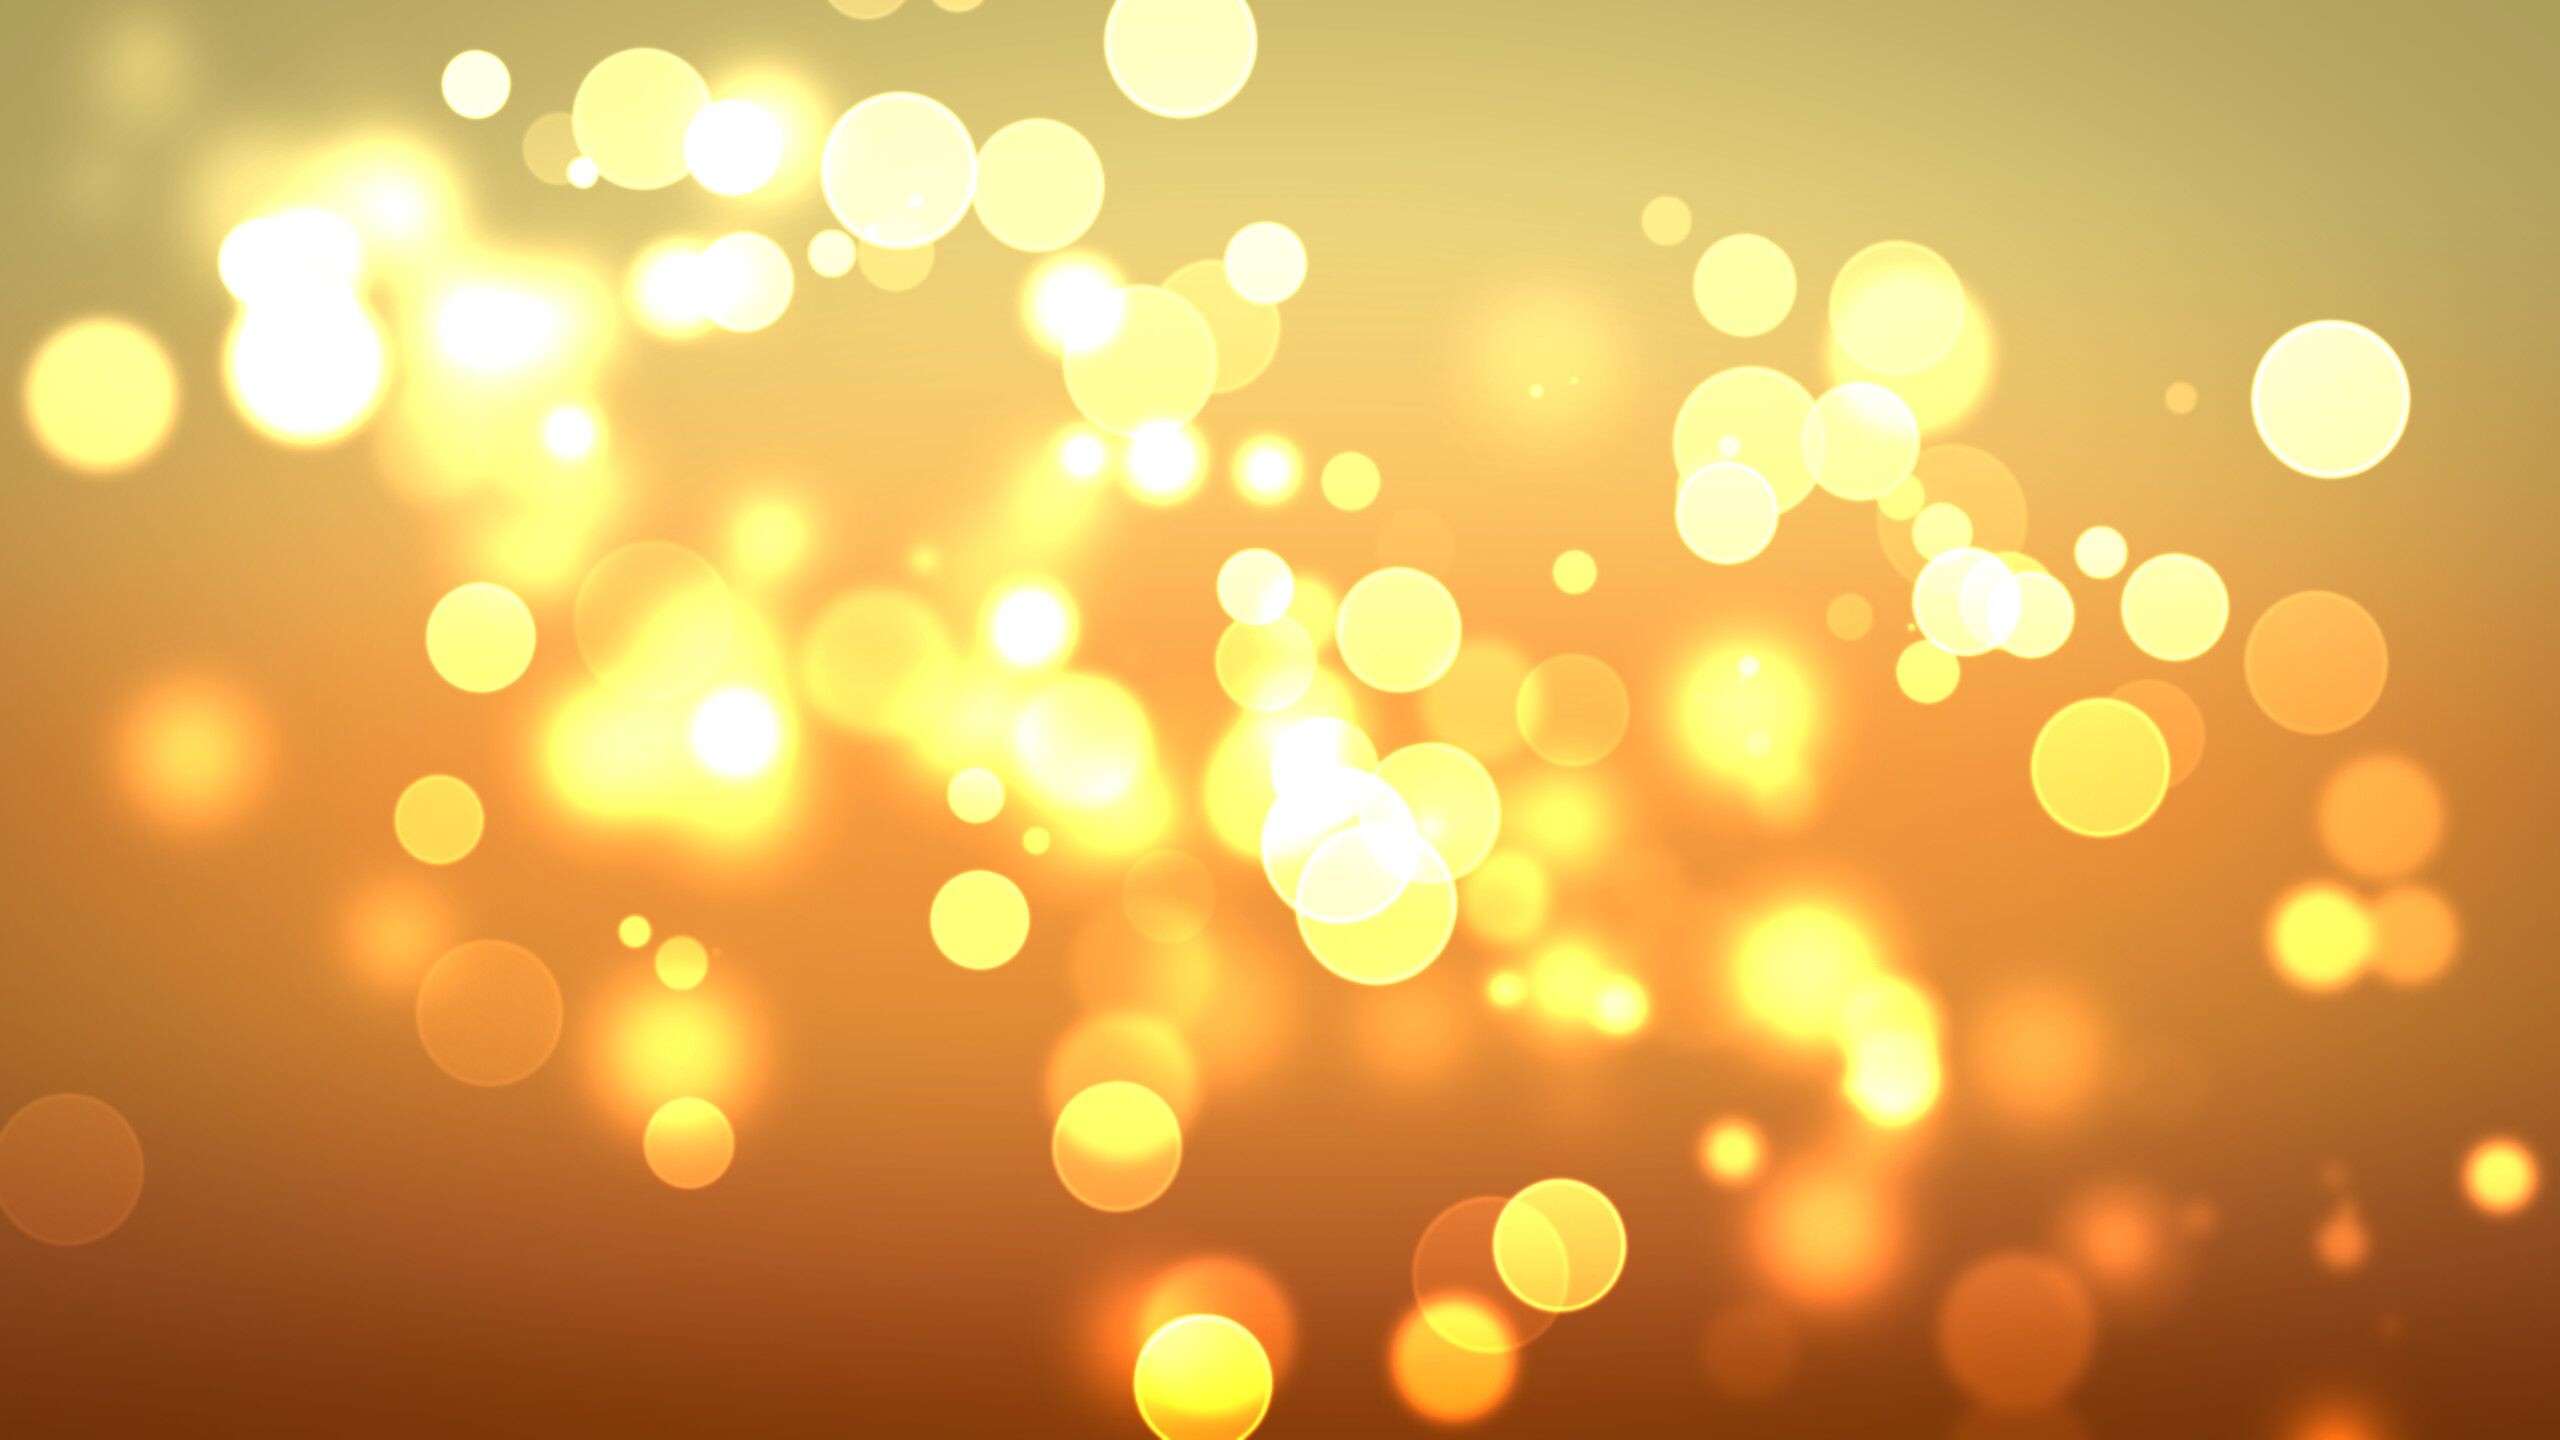 Gold Lights: Light shining through blurred window glass, Blossom of gold, Out-of-focus blur. 2560x1440 HD Background.